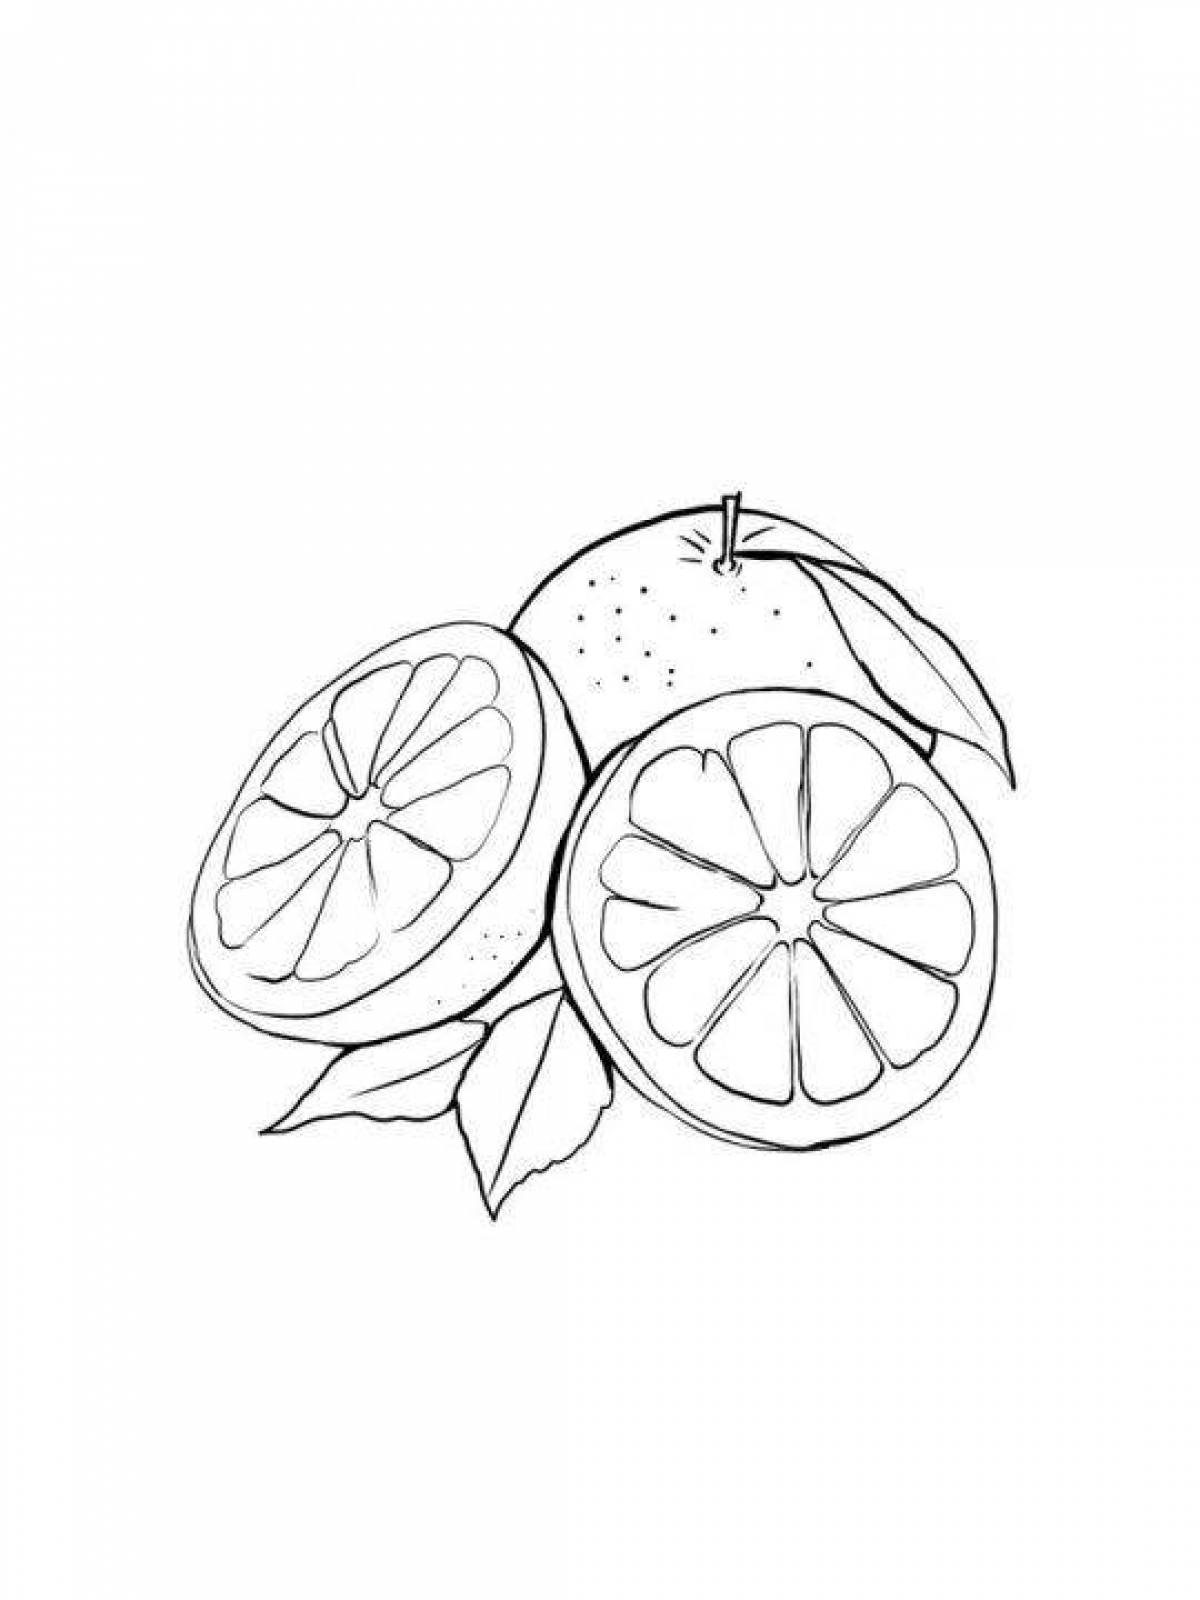 Amazing grapefruit coloring page